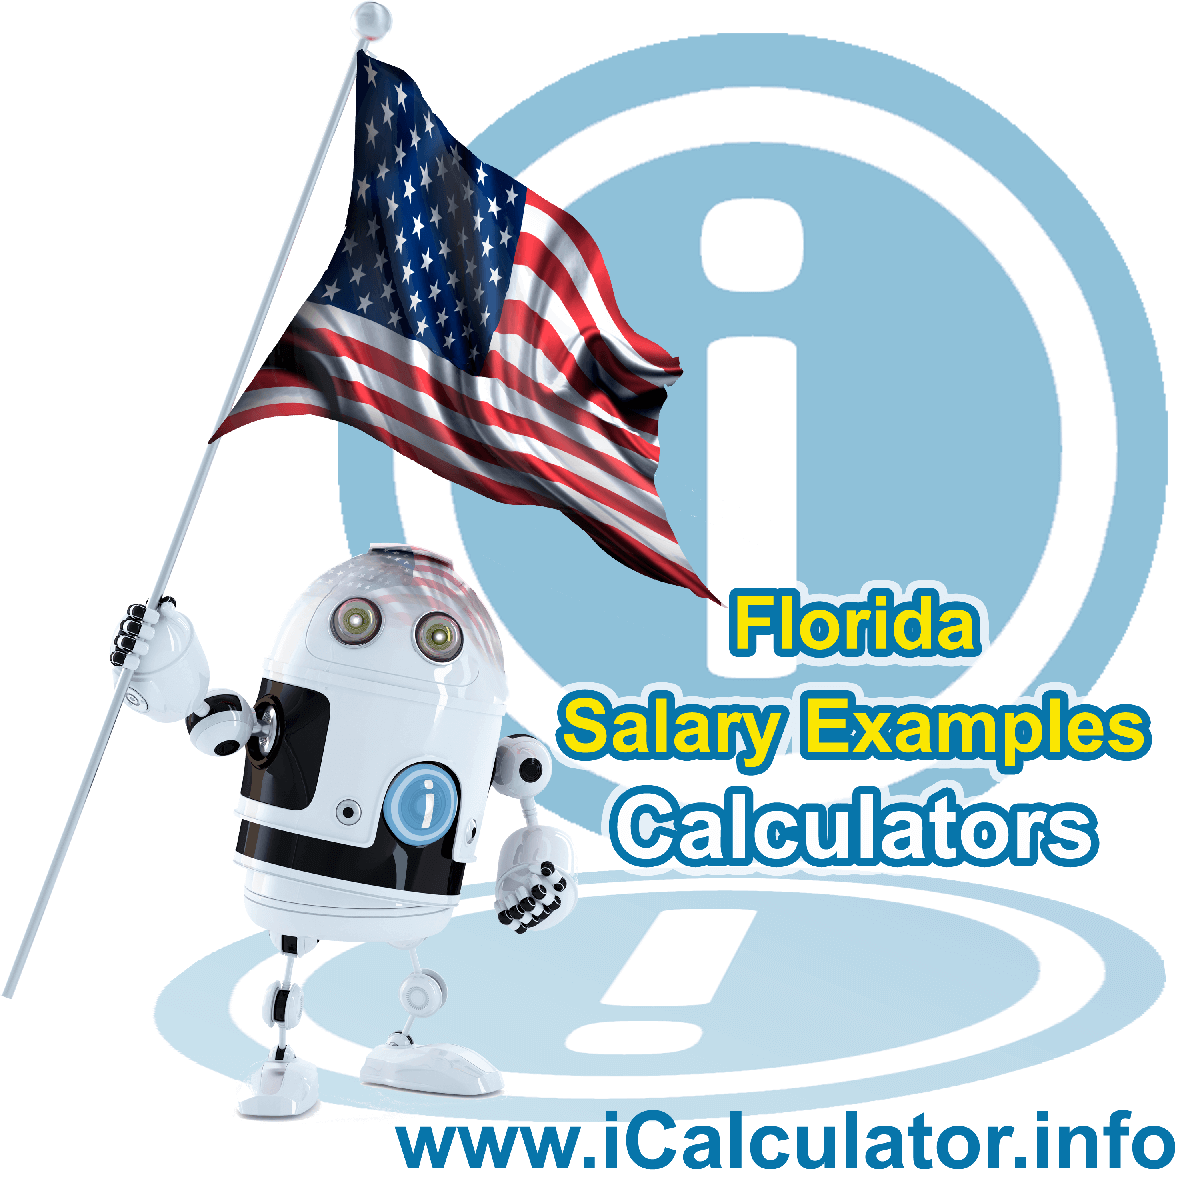 $ 35,000.00 After Tax in Florida| iCalculator™ | $ 35,000.00 salary after tax example for 2023 tax year in Florida. Federal and Florida State income tax plus social security deductions and personal tax exemptions and tax allowances for 2023 